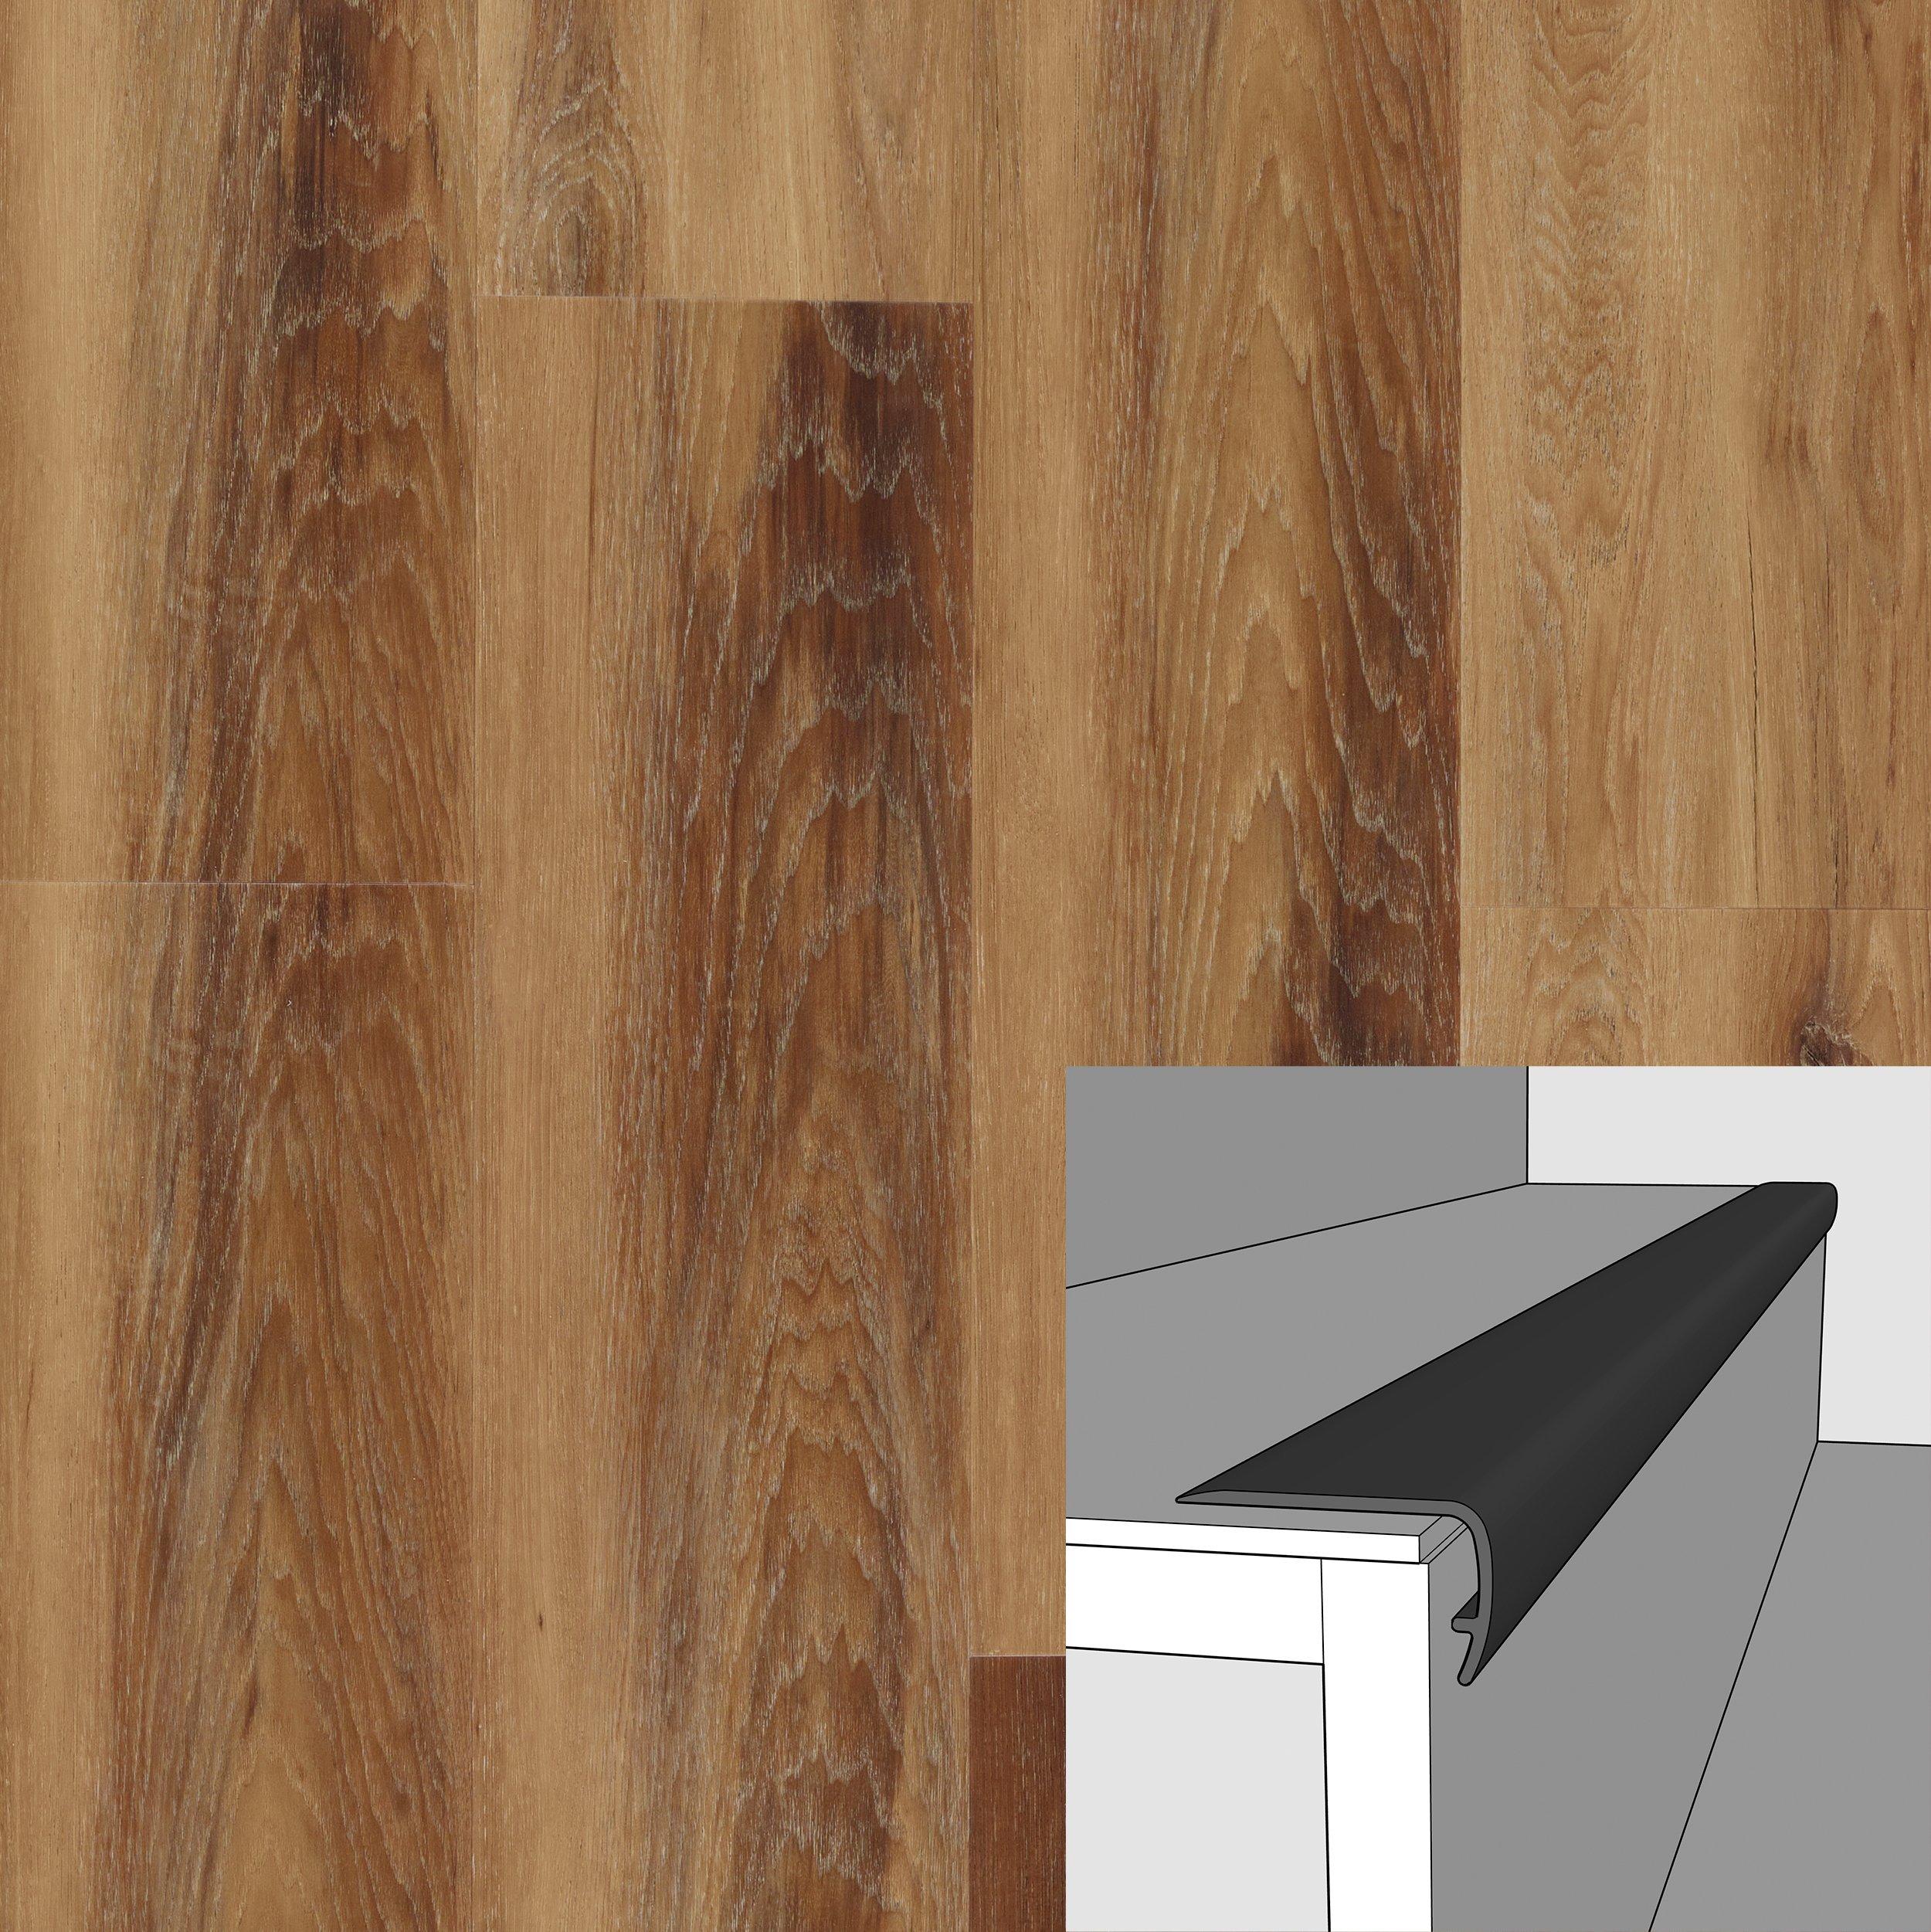 Grizzly Bend 94in. Vinyl Overlapping Stair Nose